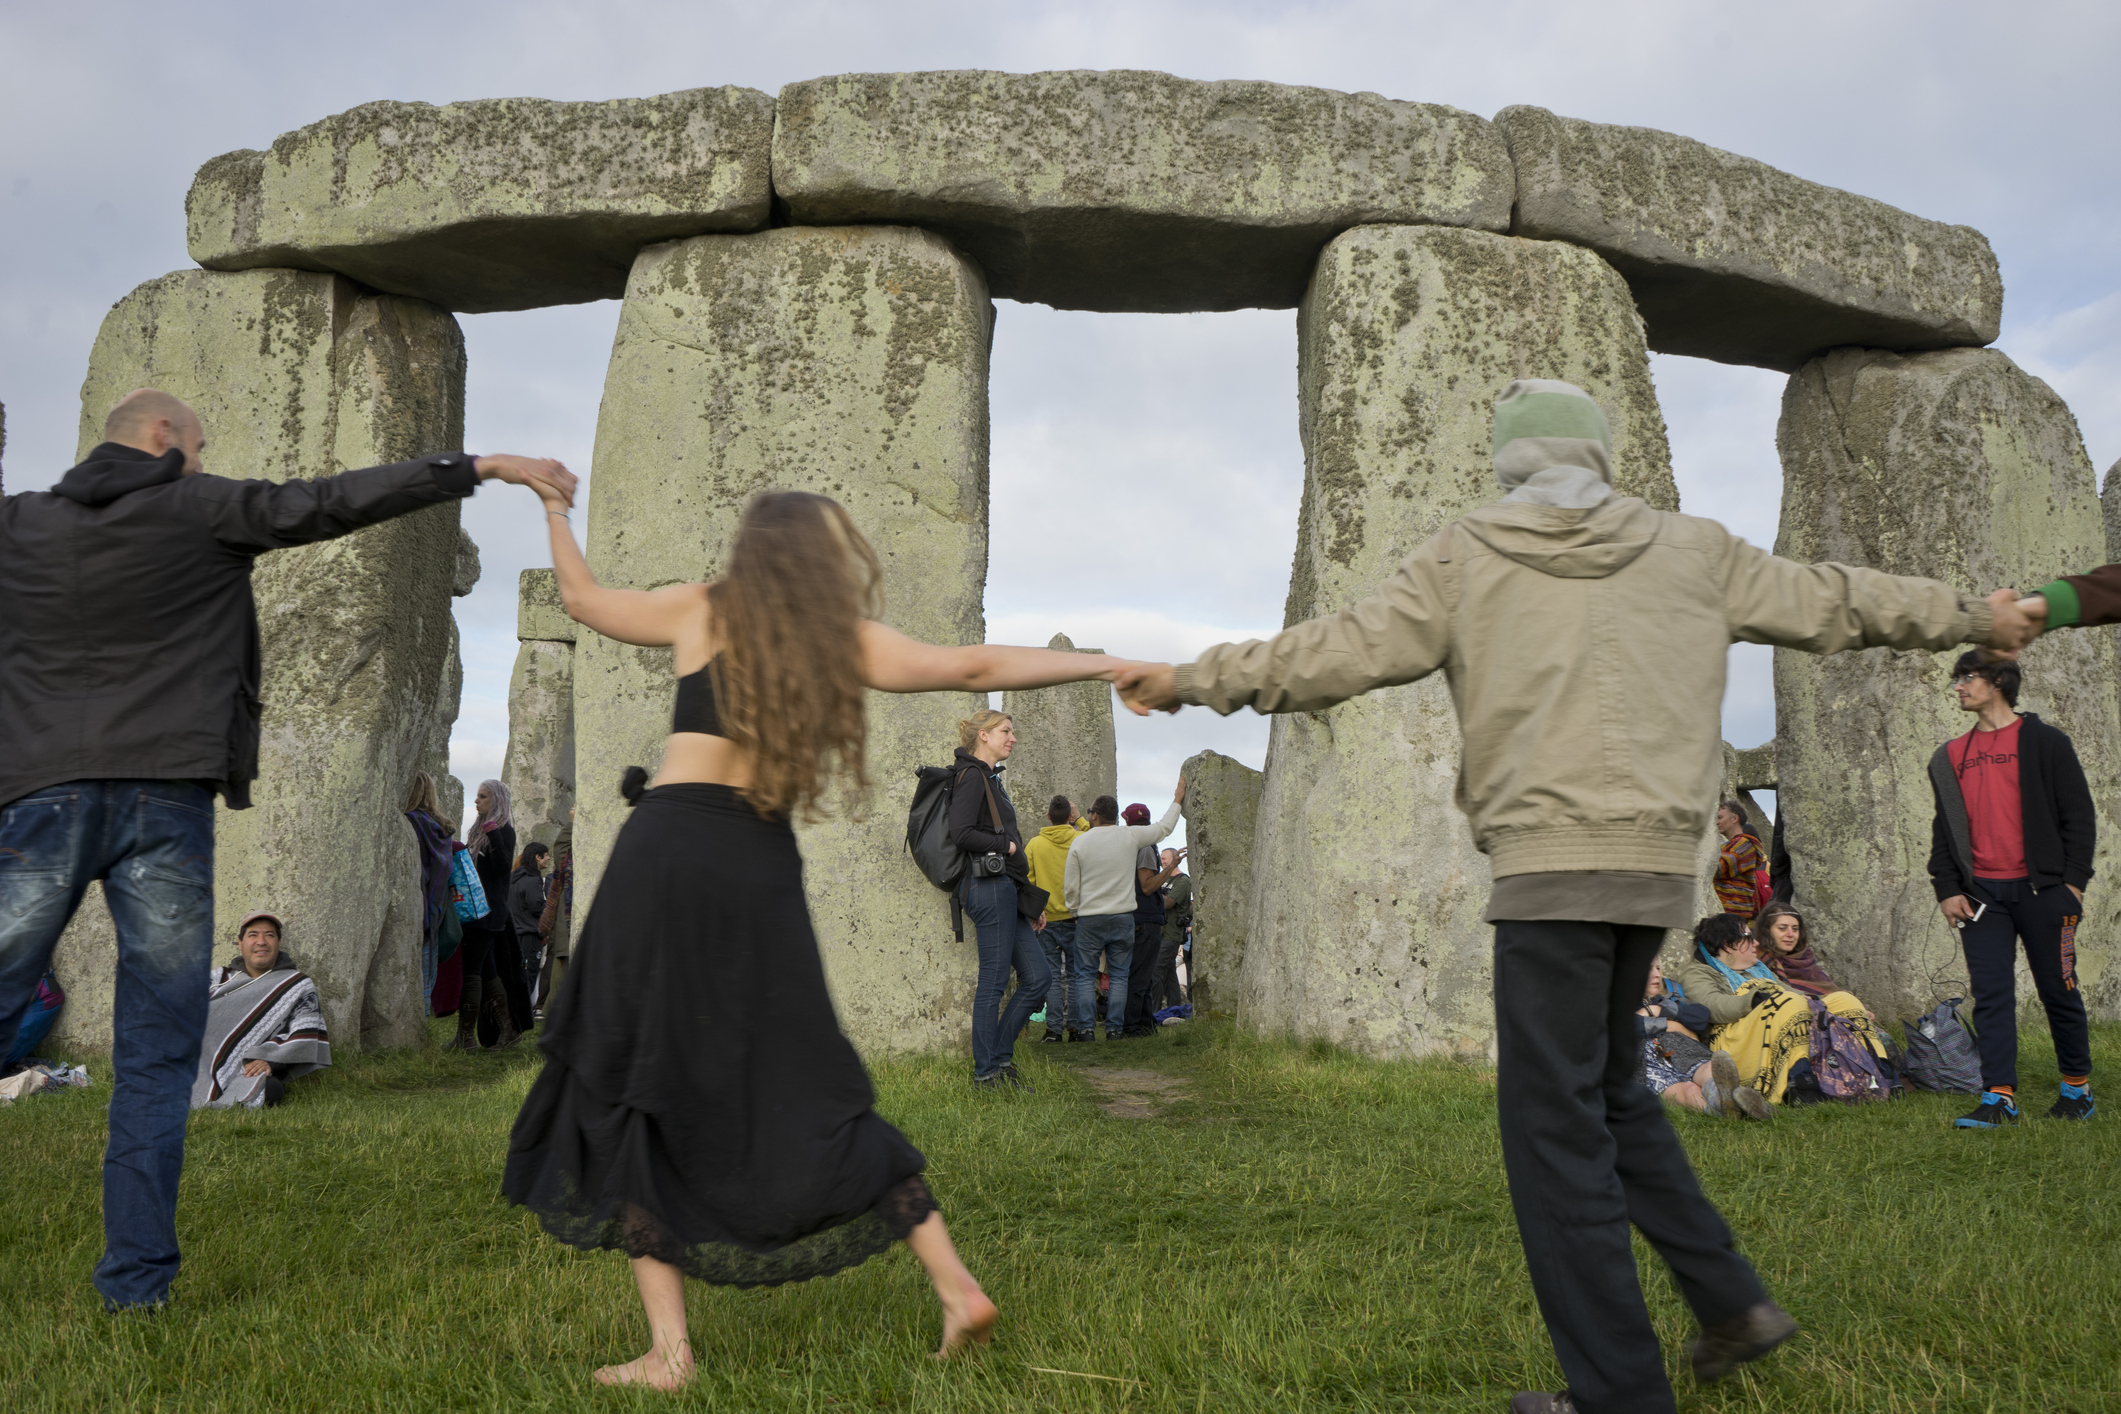 Revelers gather for summer solstice celebrations on June 21, 2016, at Stonehenge in Wiltshire, England. (Julio Etchart—Getty Images/Robert Harding Worl)